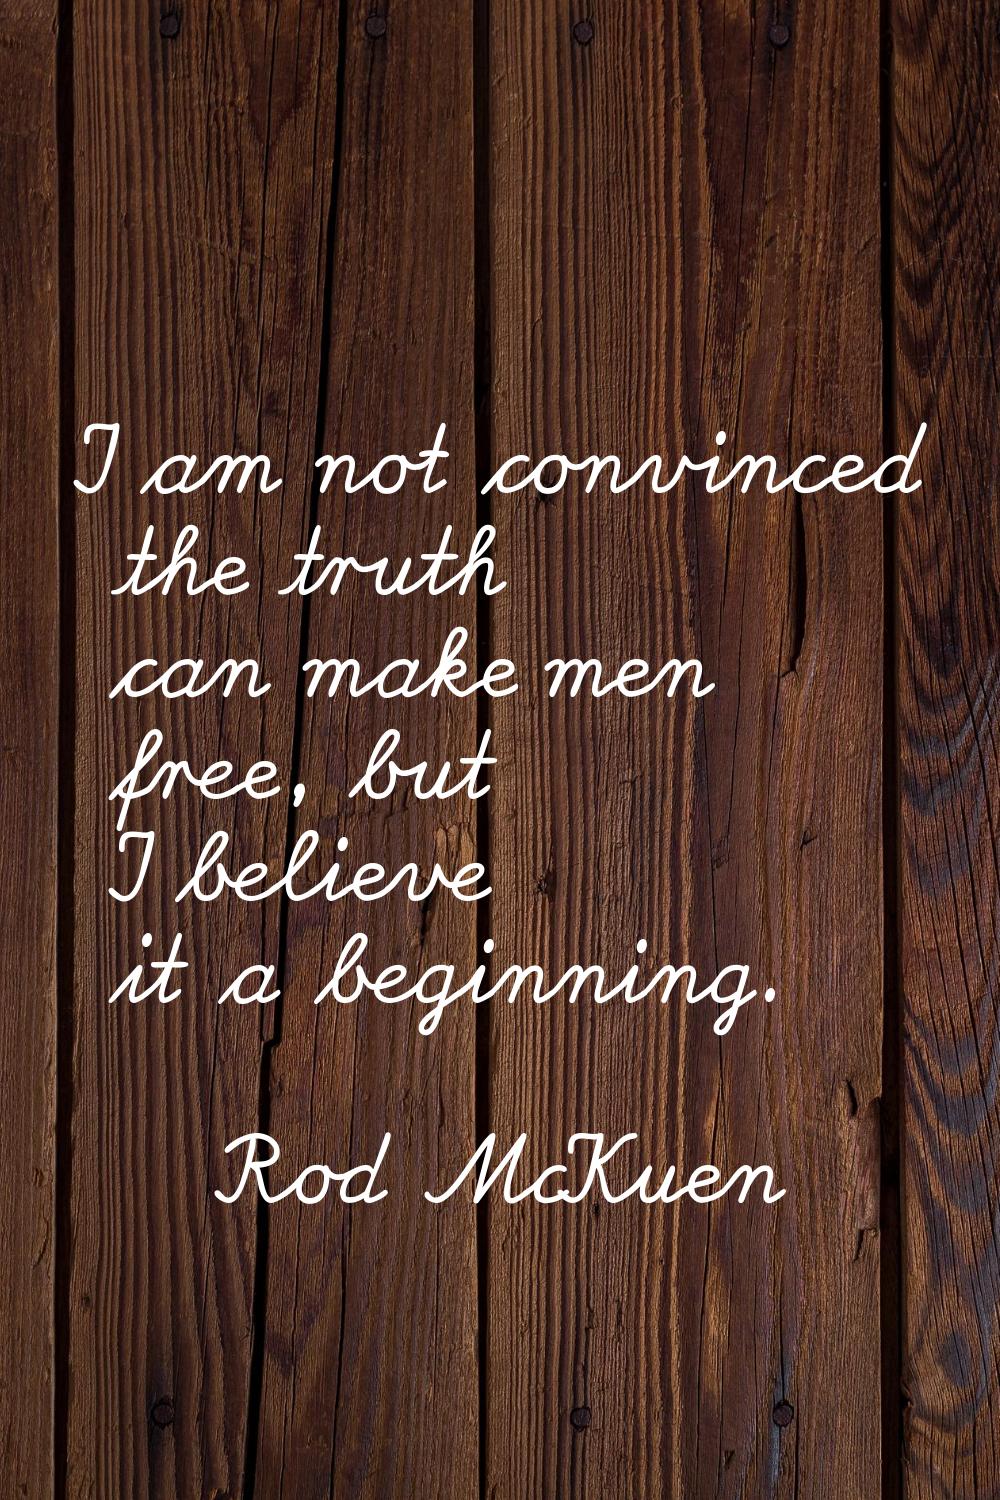 I am not convinced the truth can make men free, but I believe it a beginning.